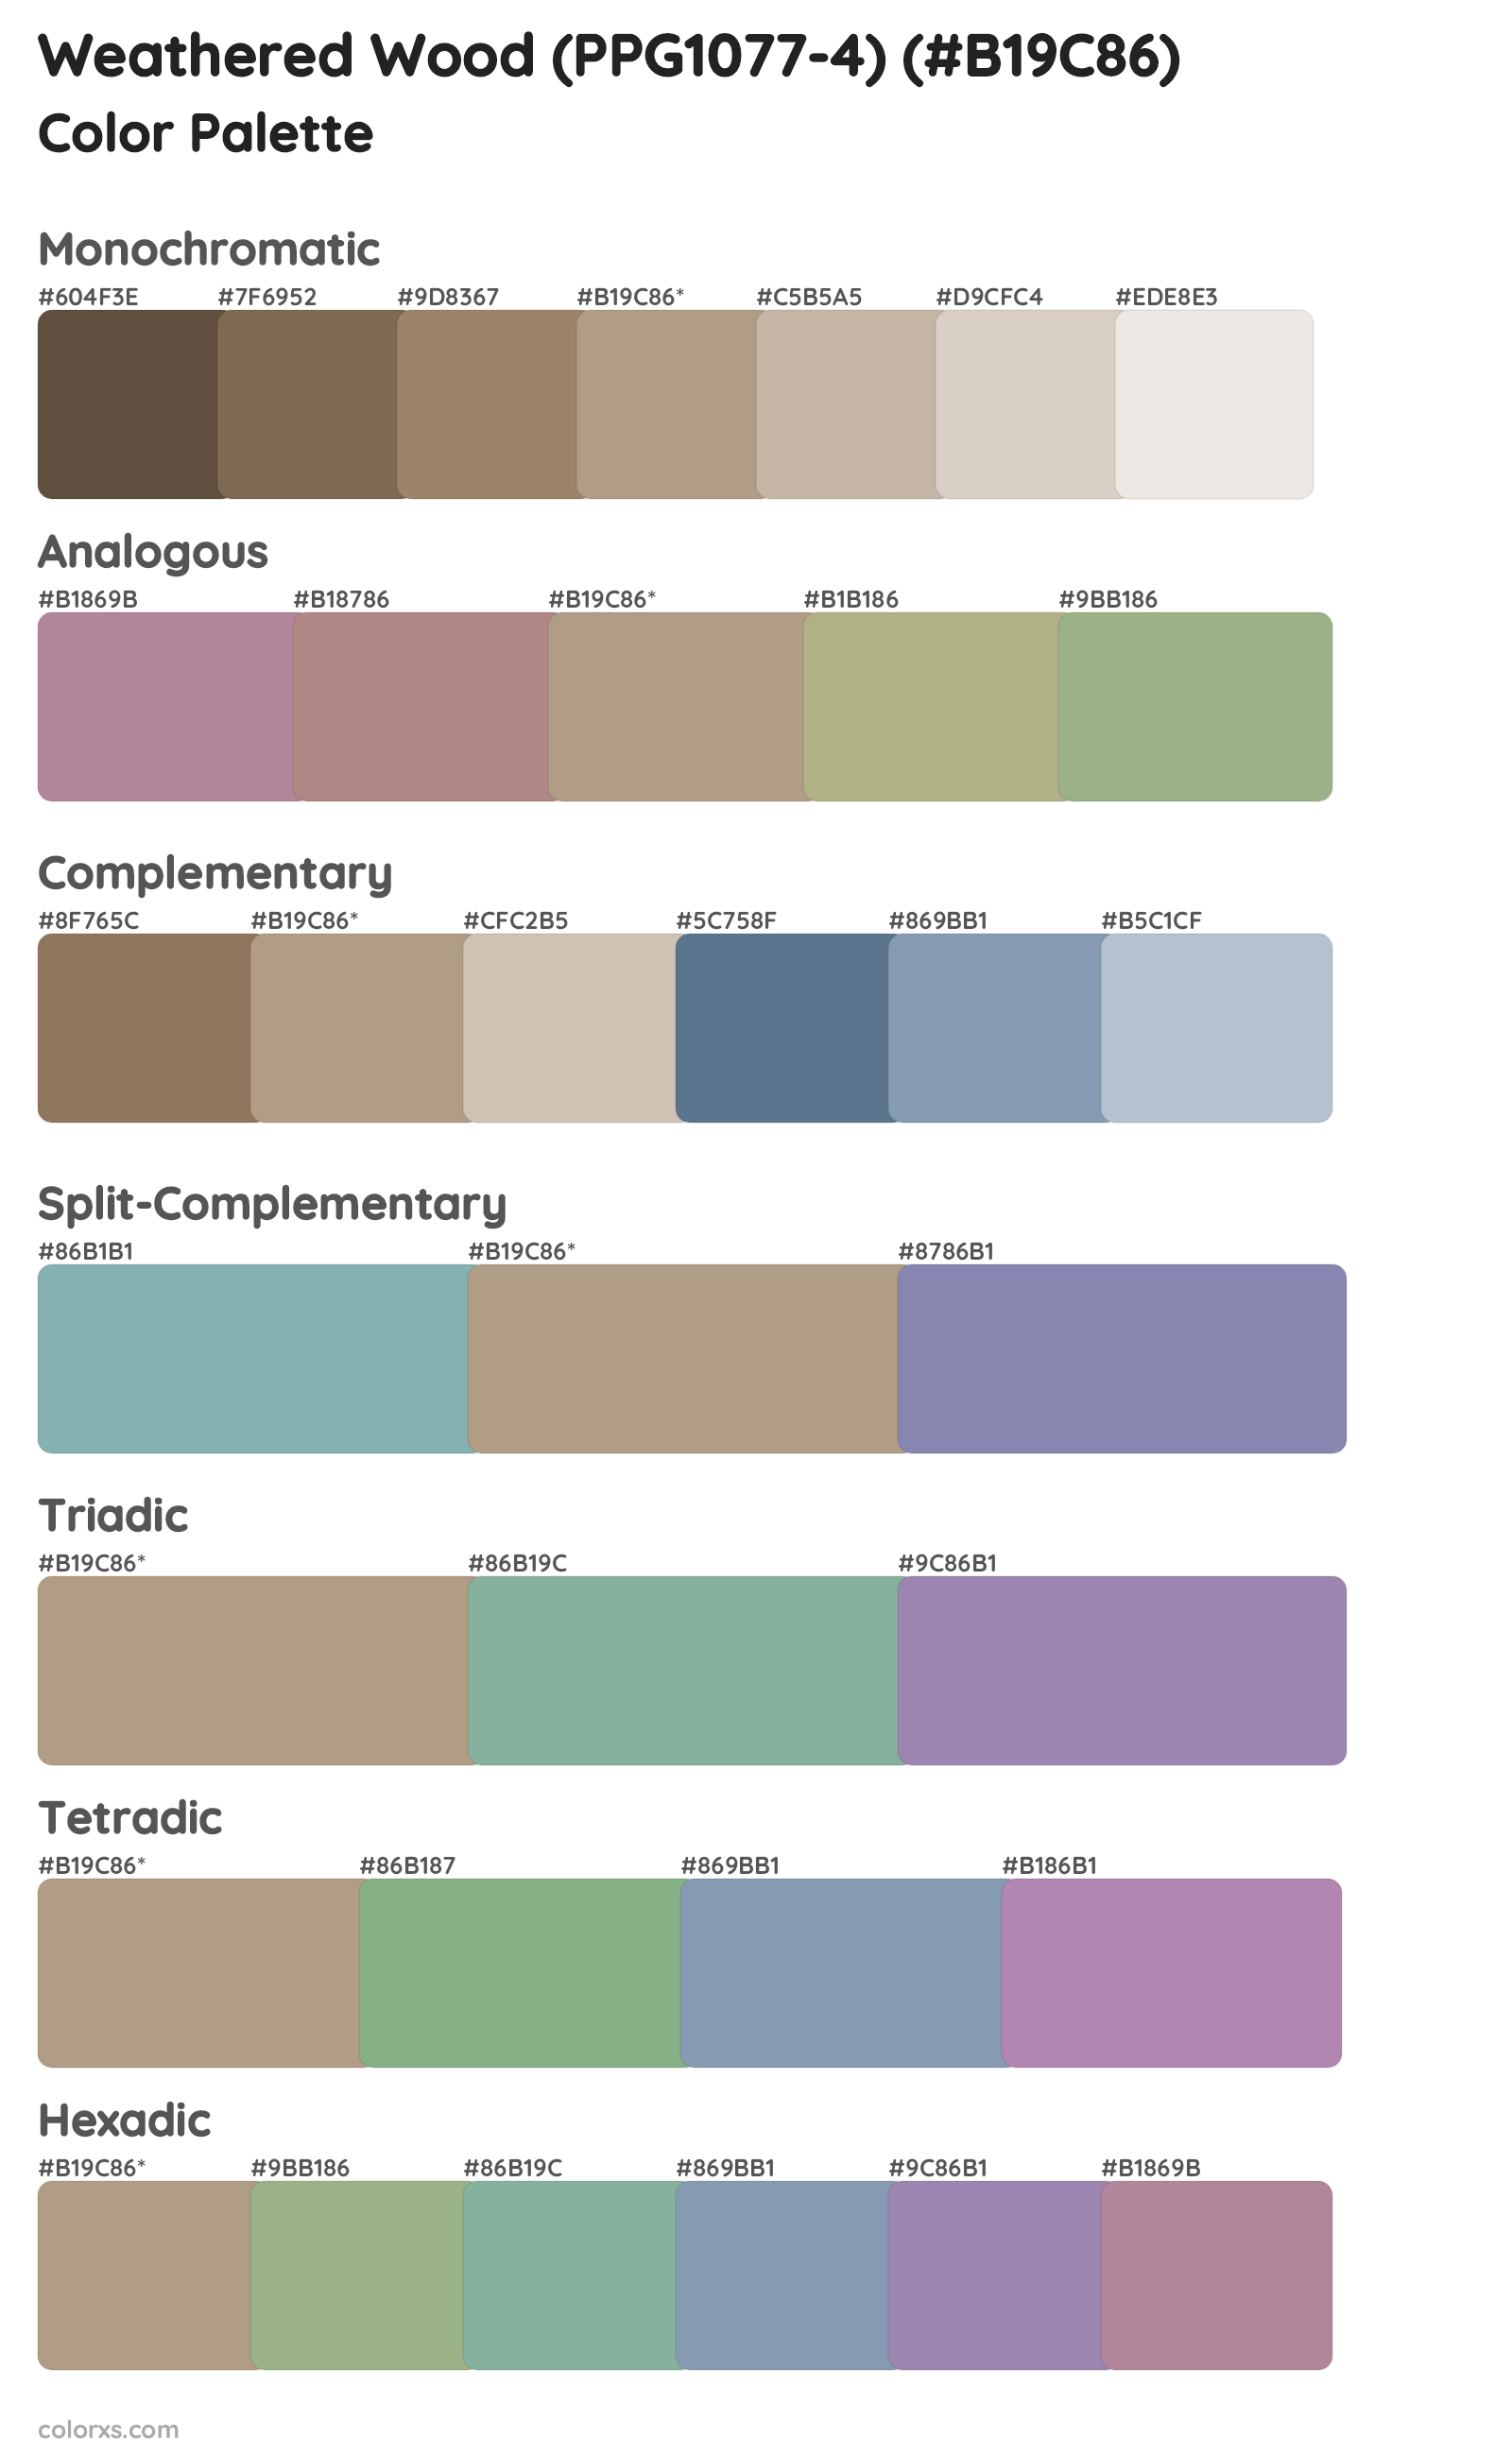 Weathered Wood (PPG1077-4) Color Scheme Palettes